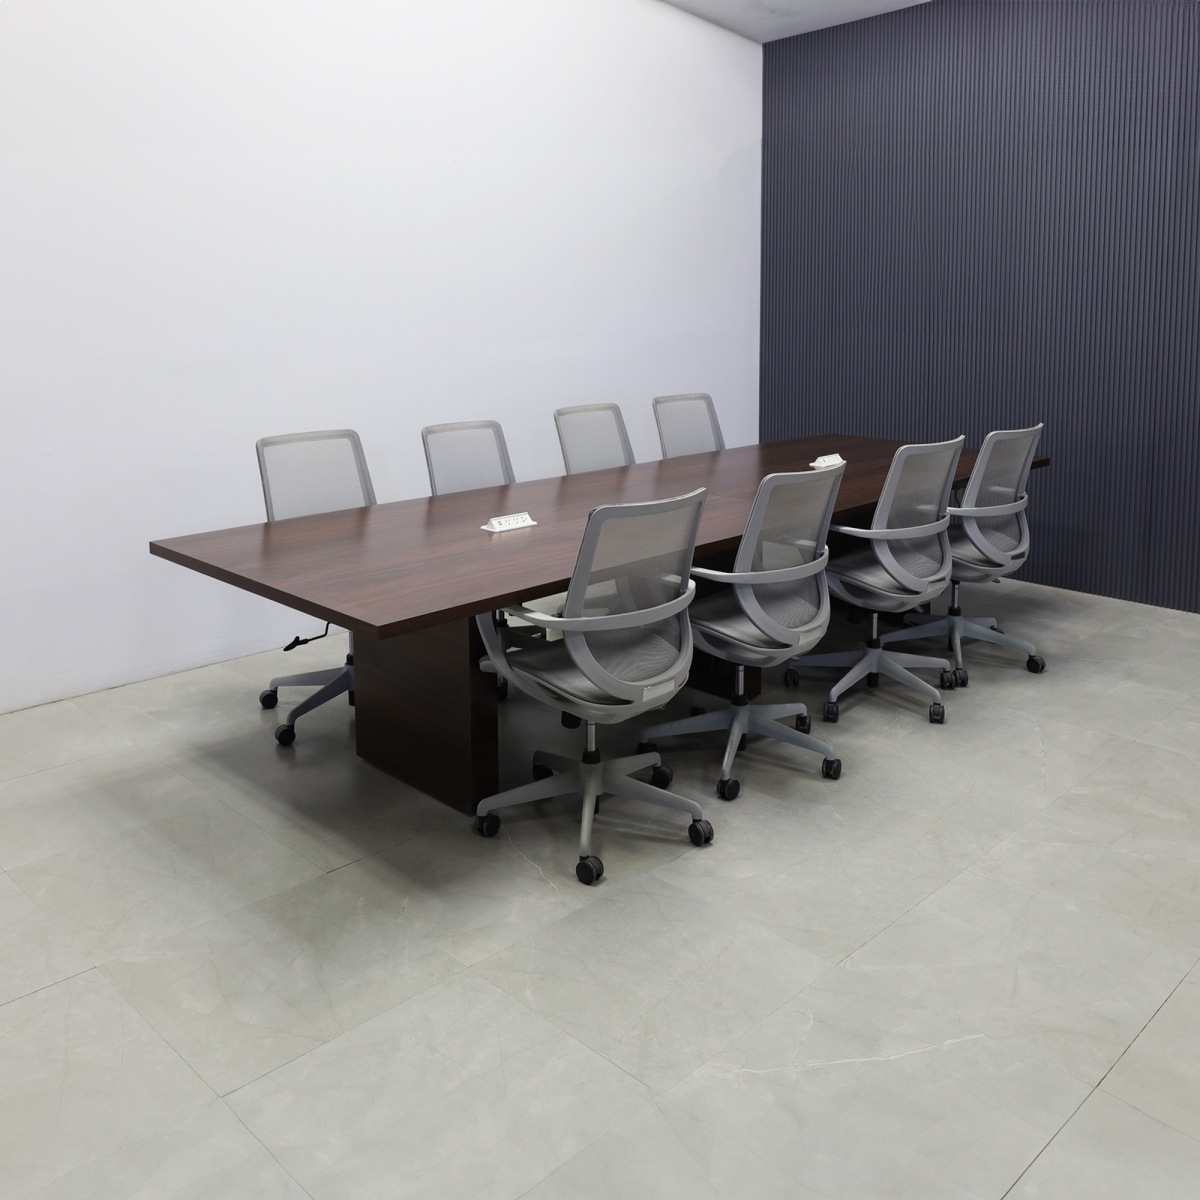 Newton Rectangular Conference Table With Laminate Top